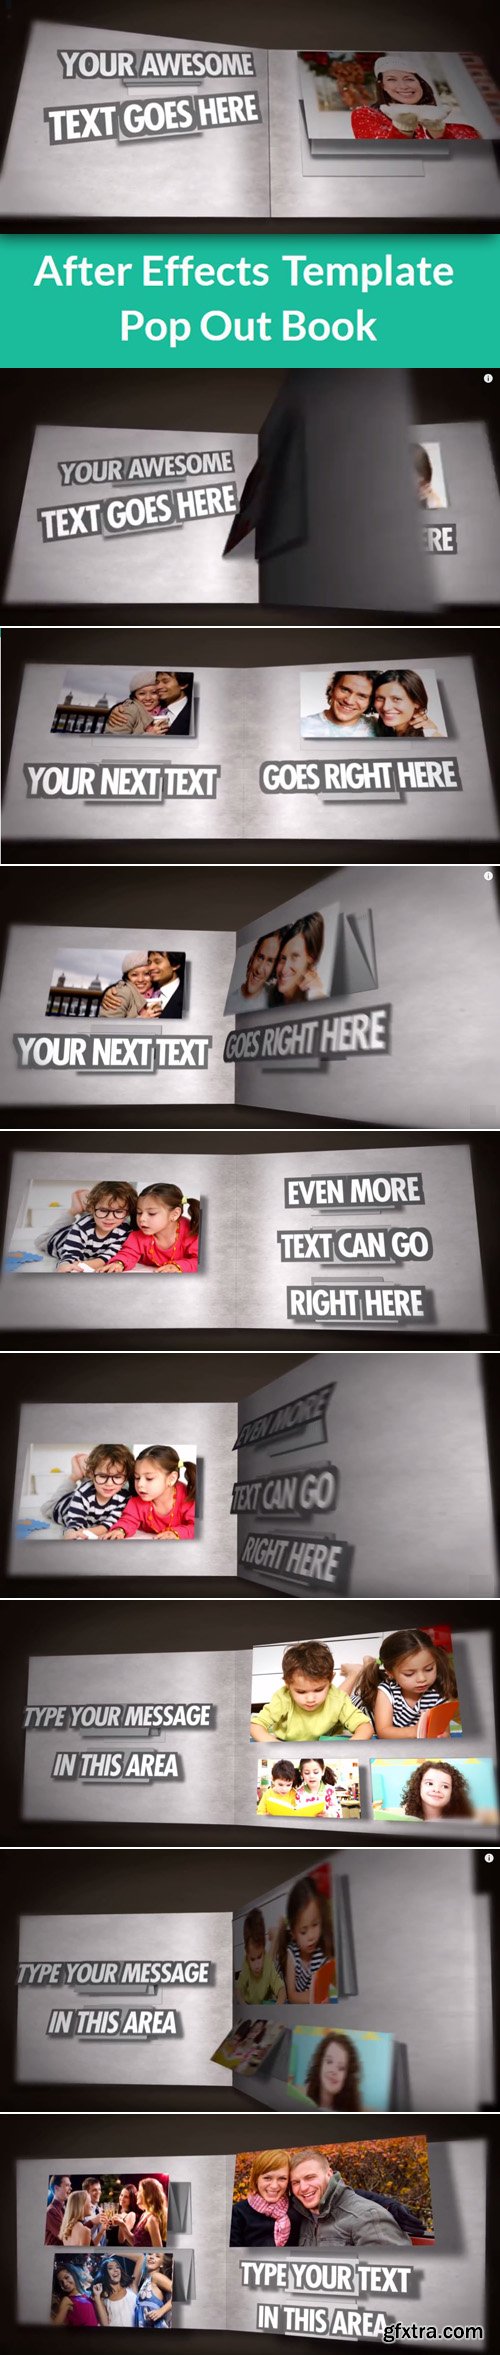 Pop Out Book - After Effects Template AEP